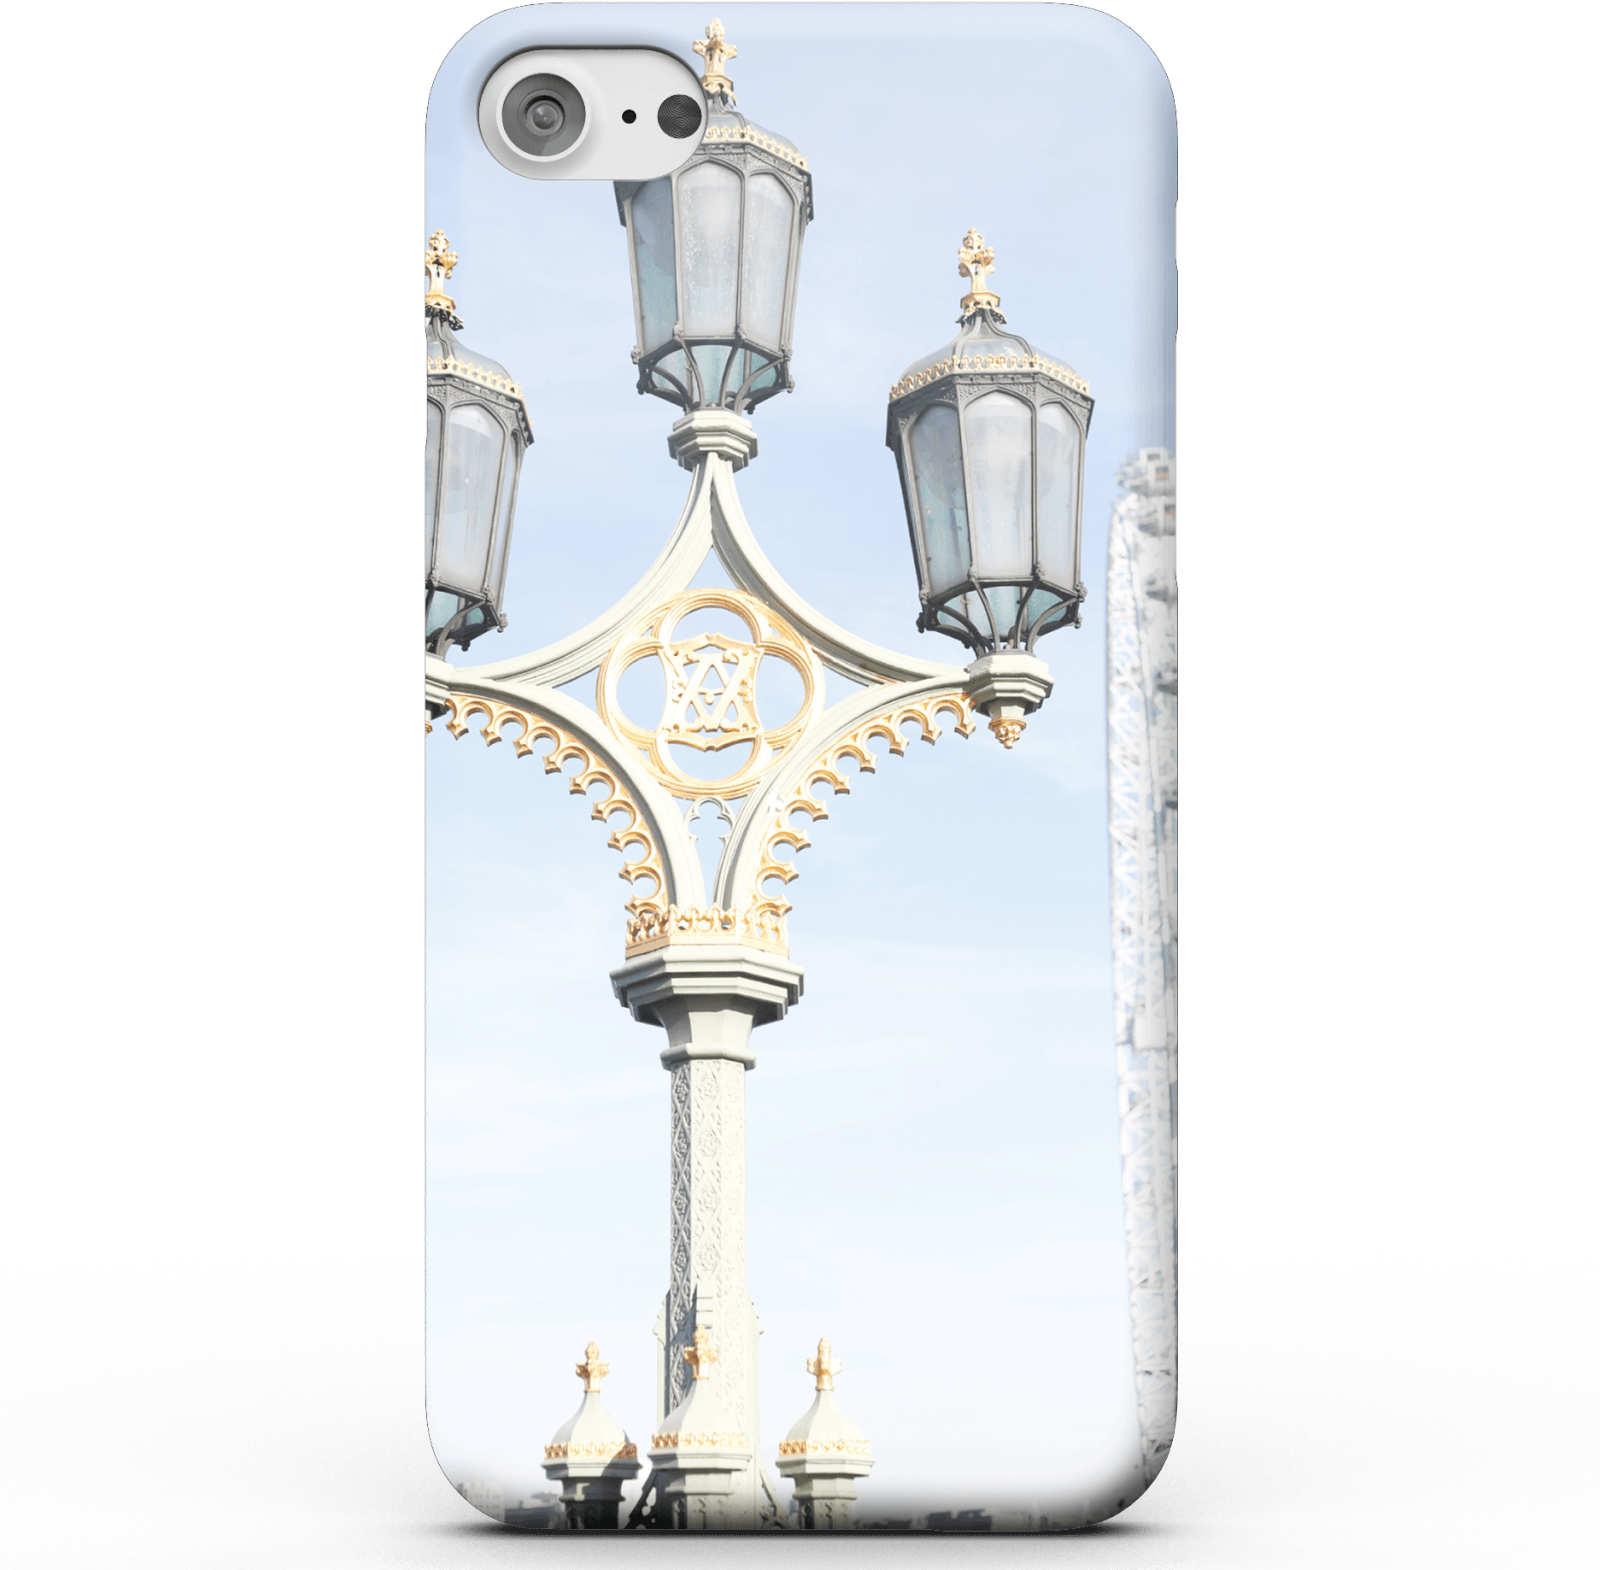 Street Lamps Phone Case for iPhone and Android - iPhone 5/5s - Snap Case - Matte